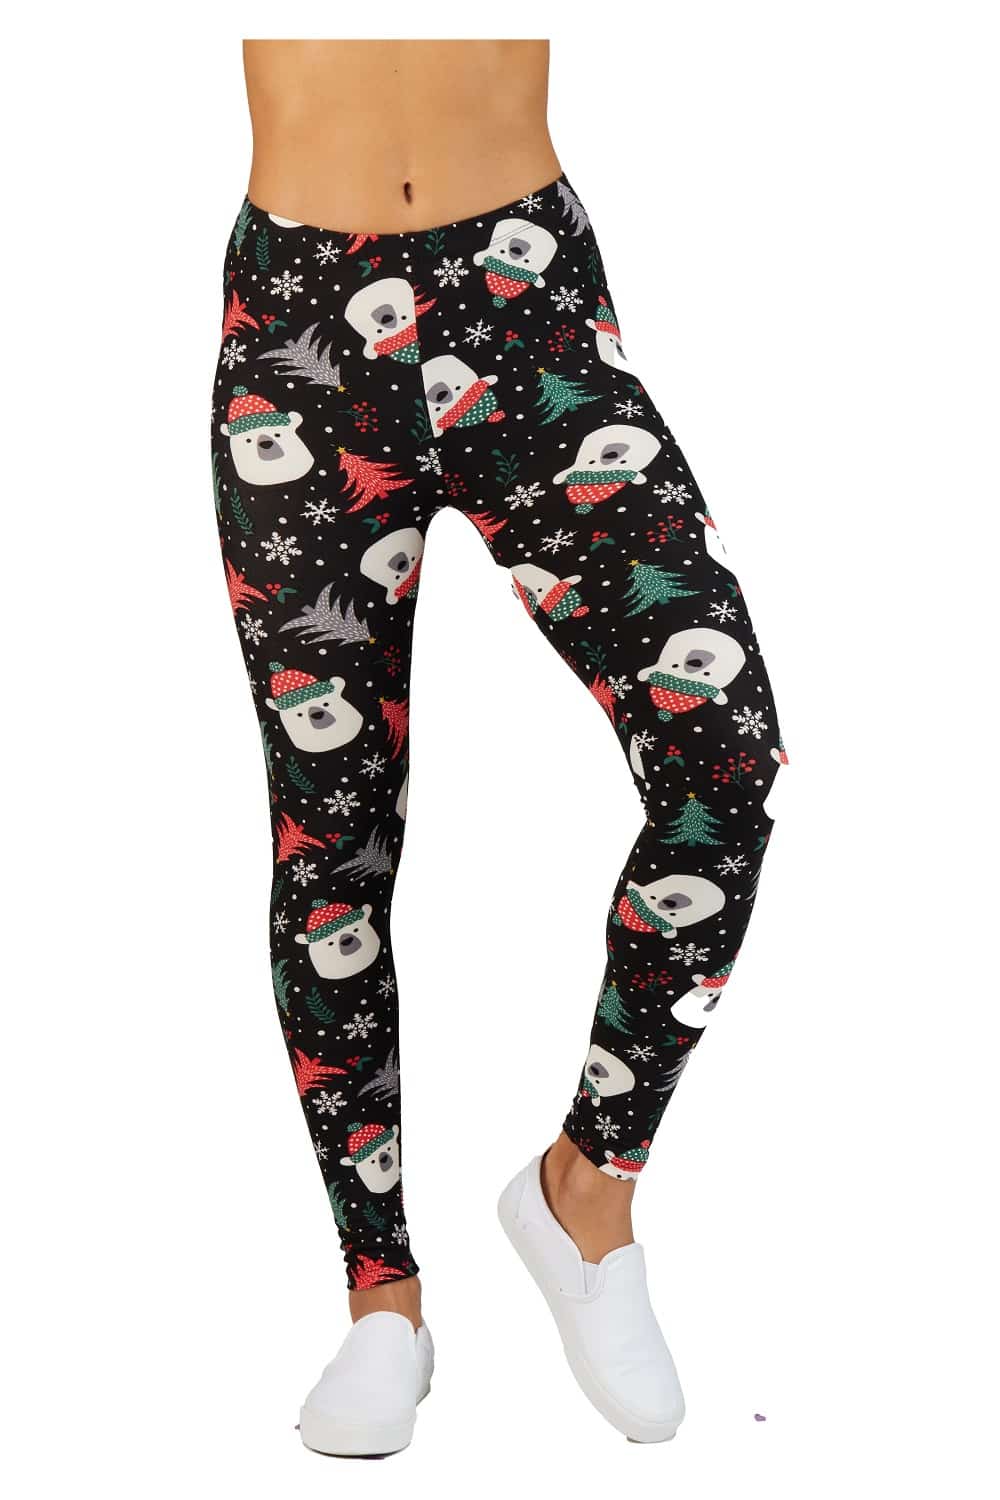 Christmas Print Ankle Leggings 1 inch Elastic Waisted with Christmas Tree  Snow and Bear Snowman - Its All Leggings